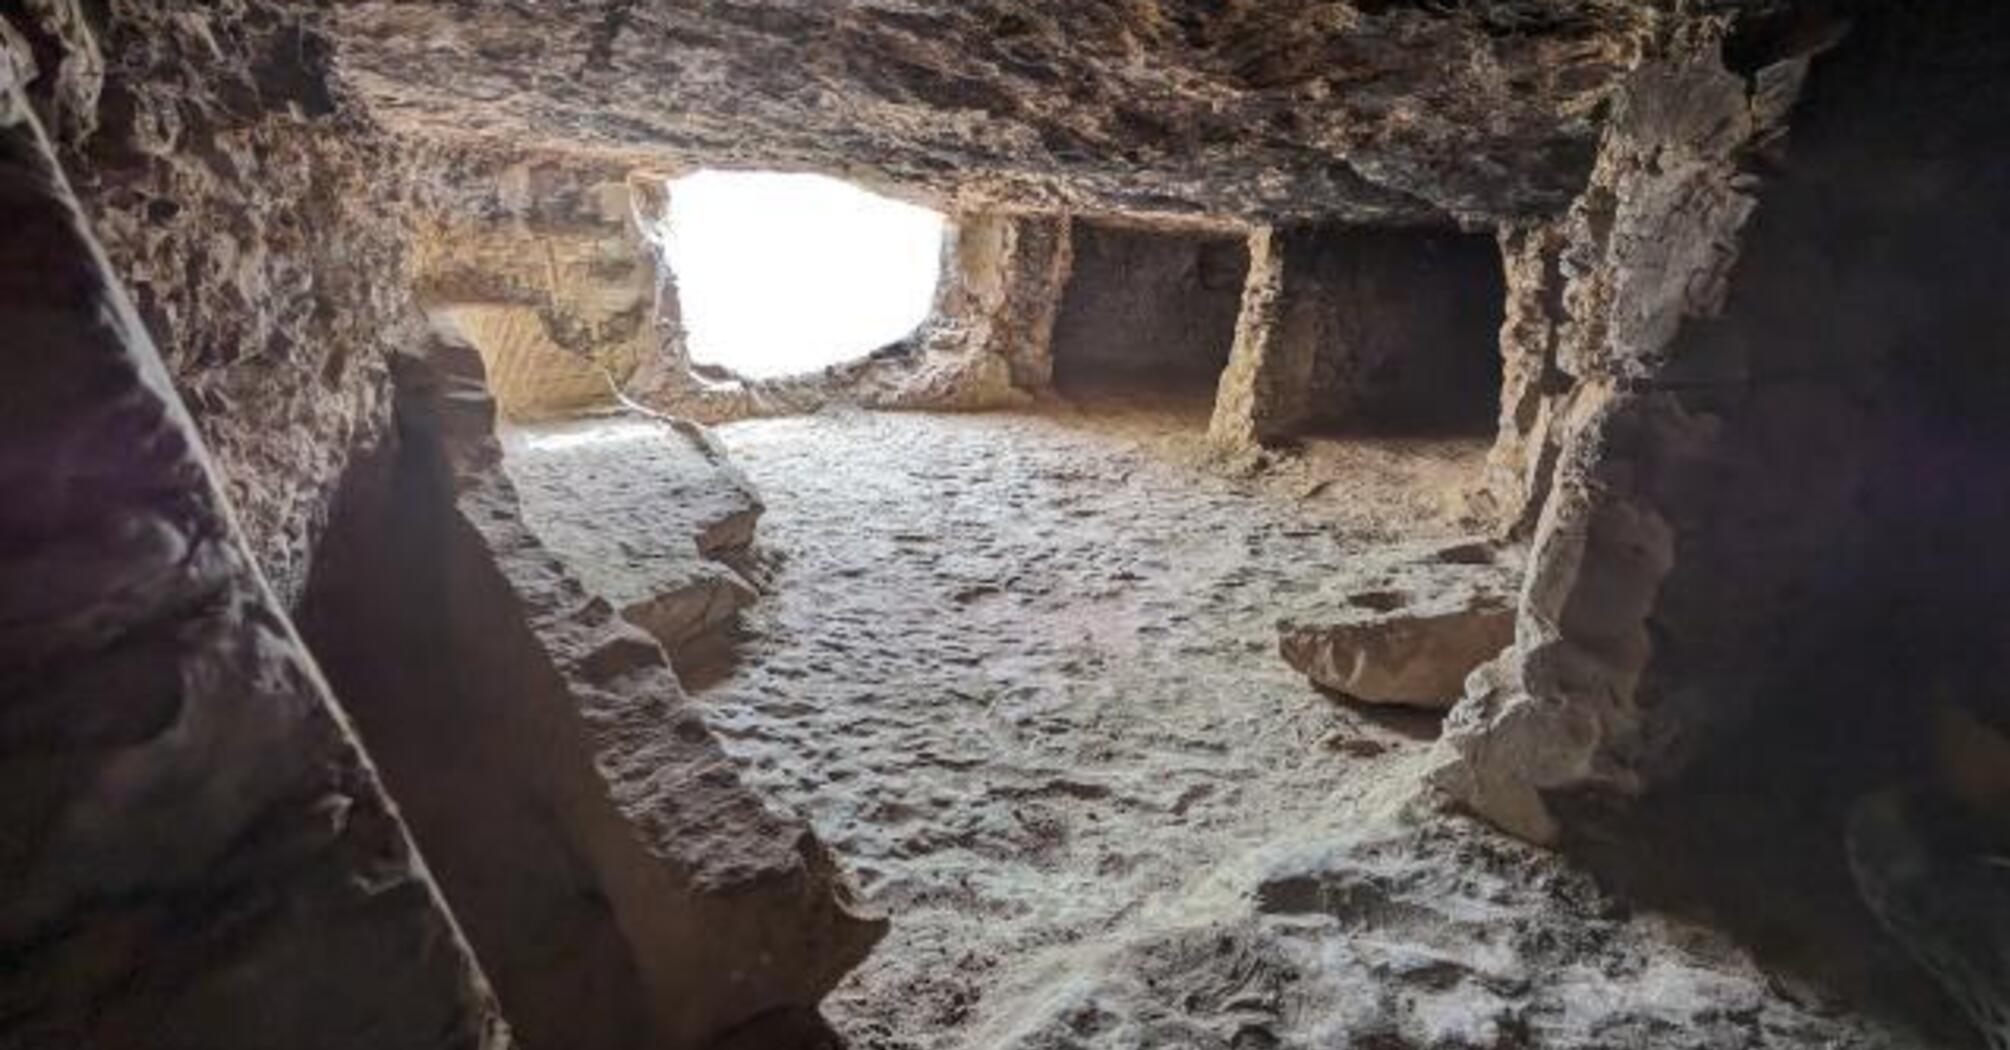 'Exceptional' discovery reveals more than 30 ancient Egyptian tombs built into hillside